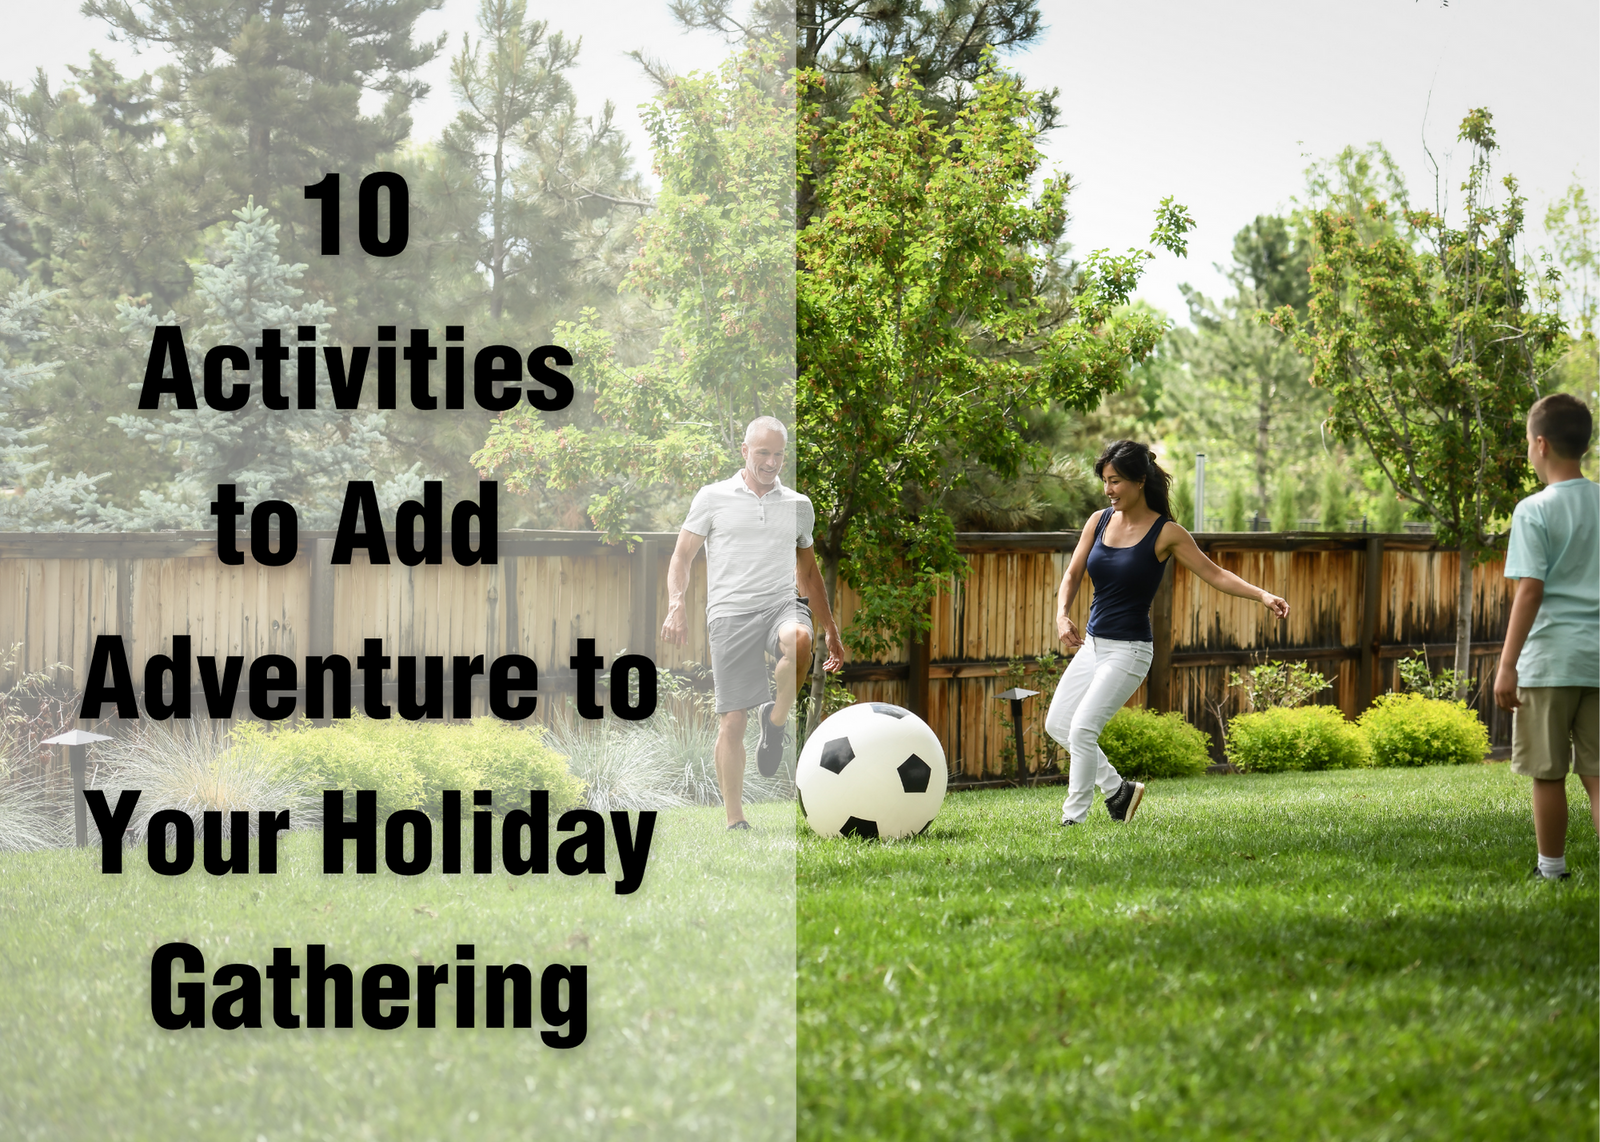 10 Activities To Add Adventure To Your Holiday Gathering